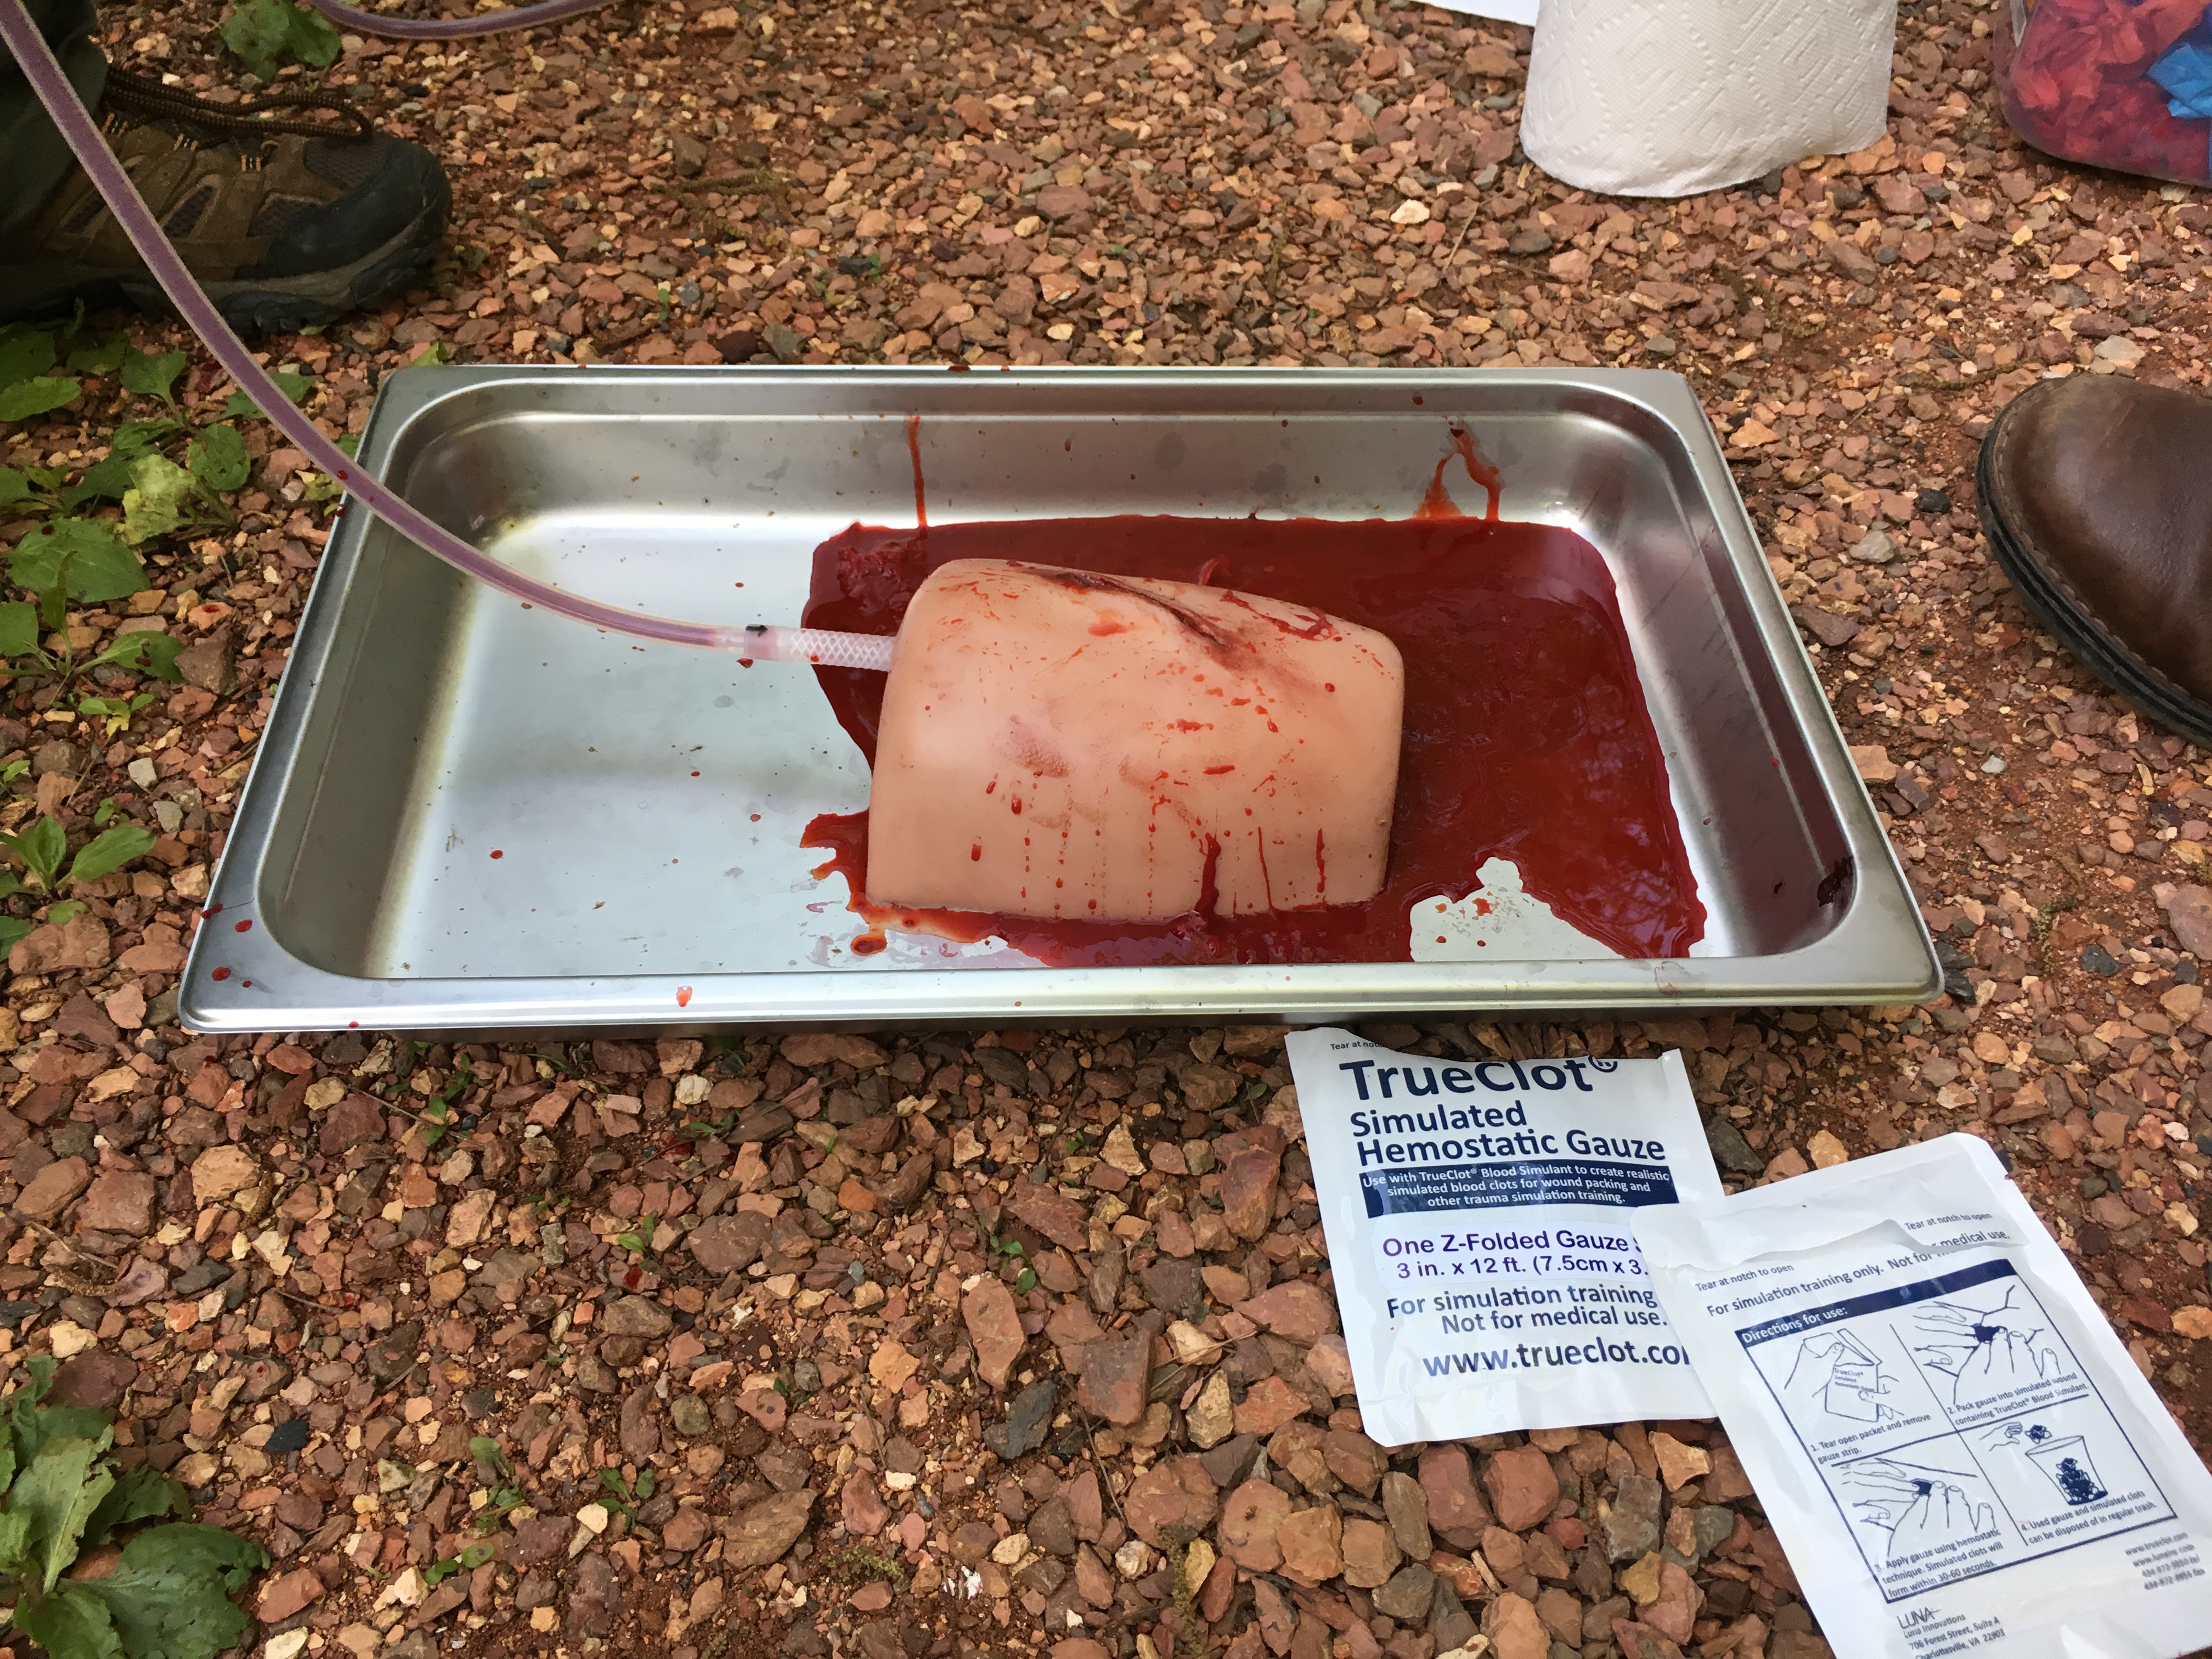 Tools of the training trade: hemostatic gauze, fake blood that clots like the real thing, and a fake human thigh.